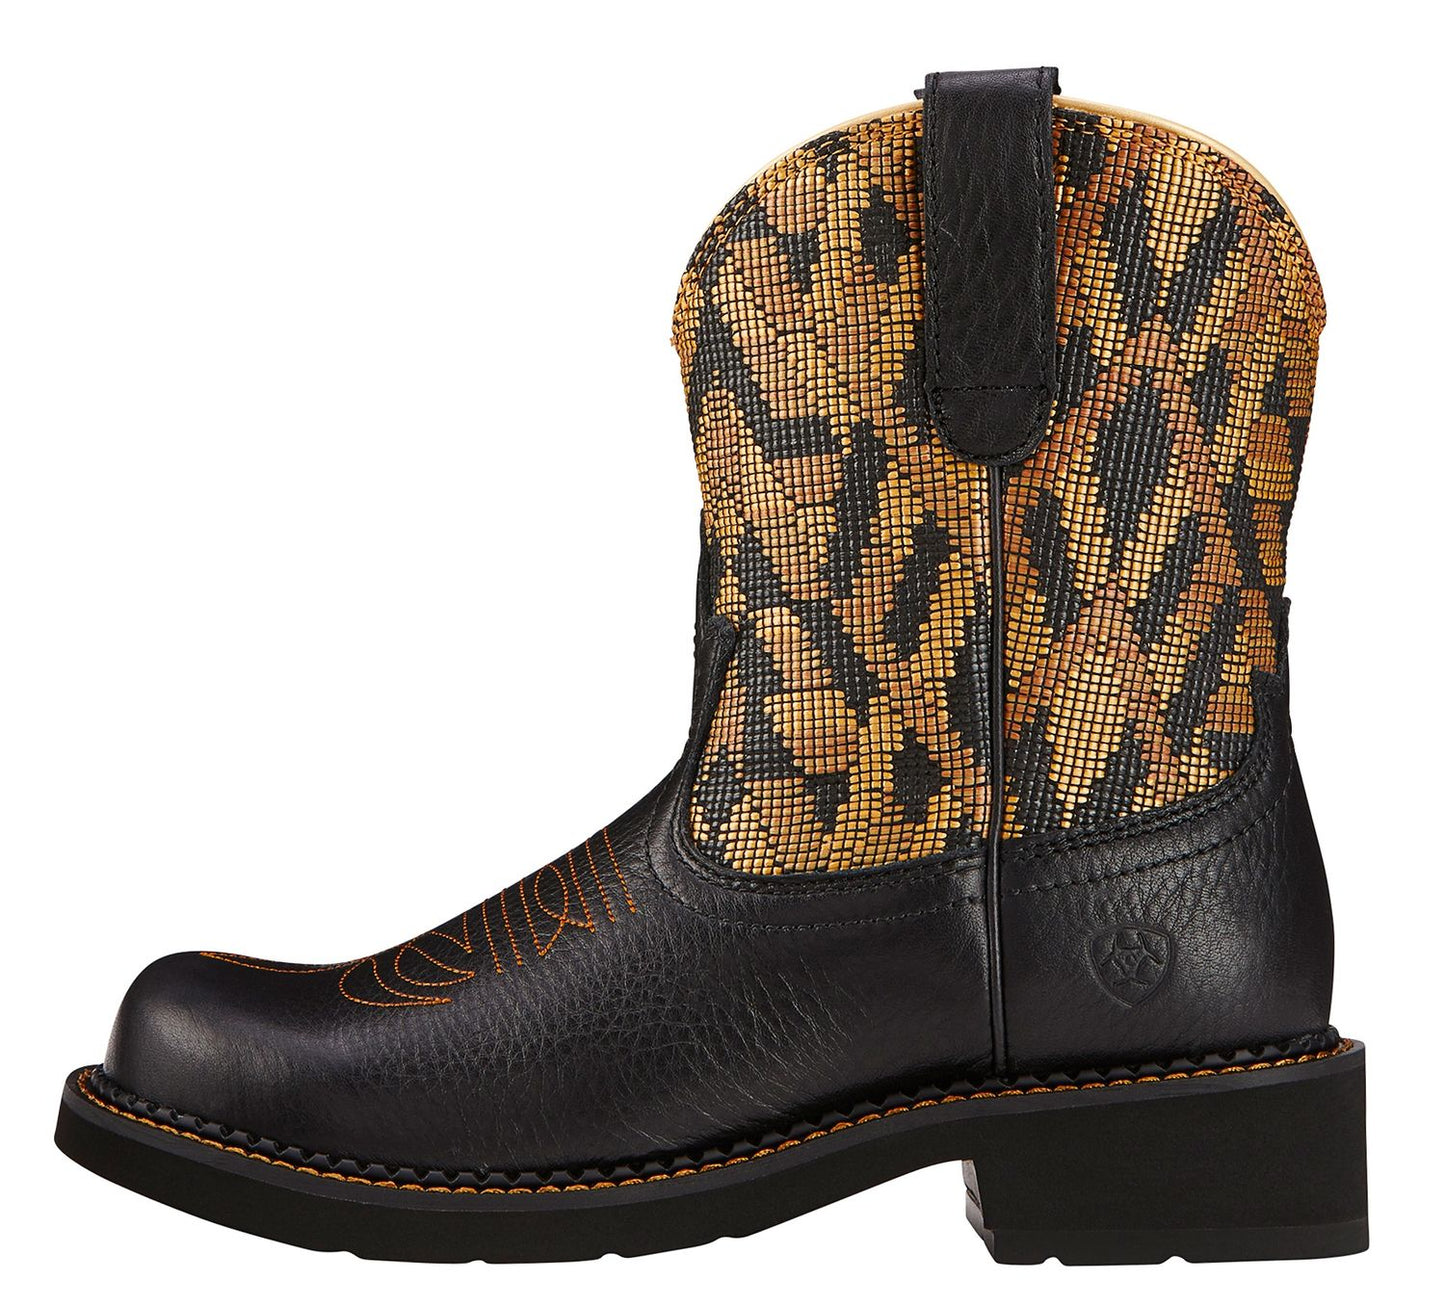 Ariat® Women's Fatbaby Heritage Vintage Western Boots